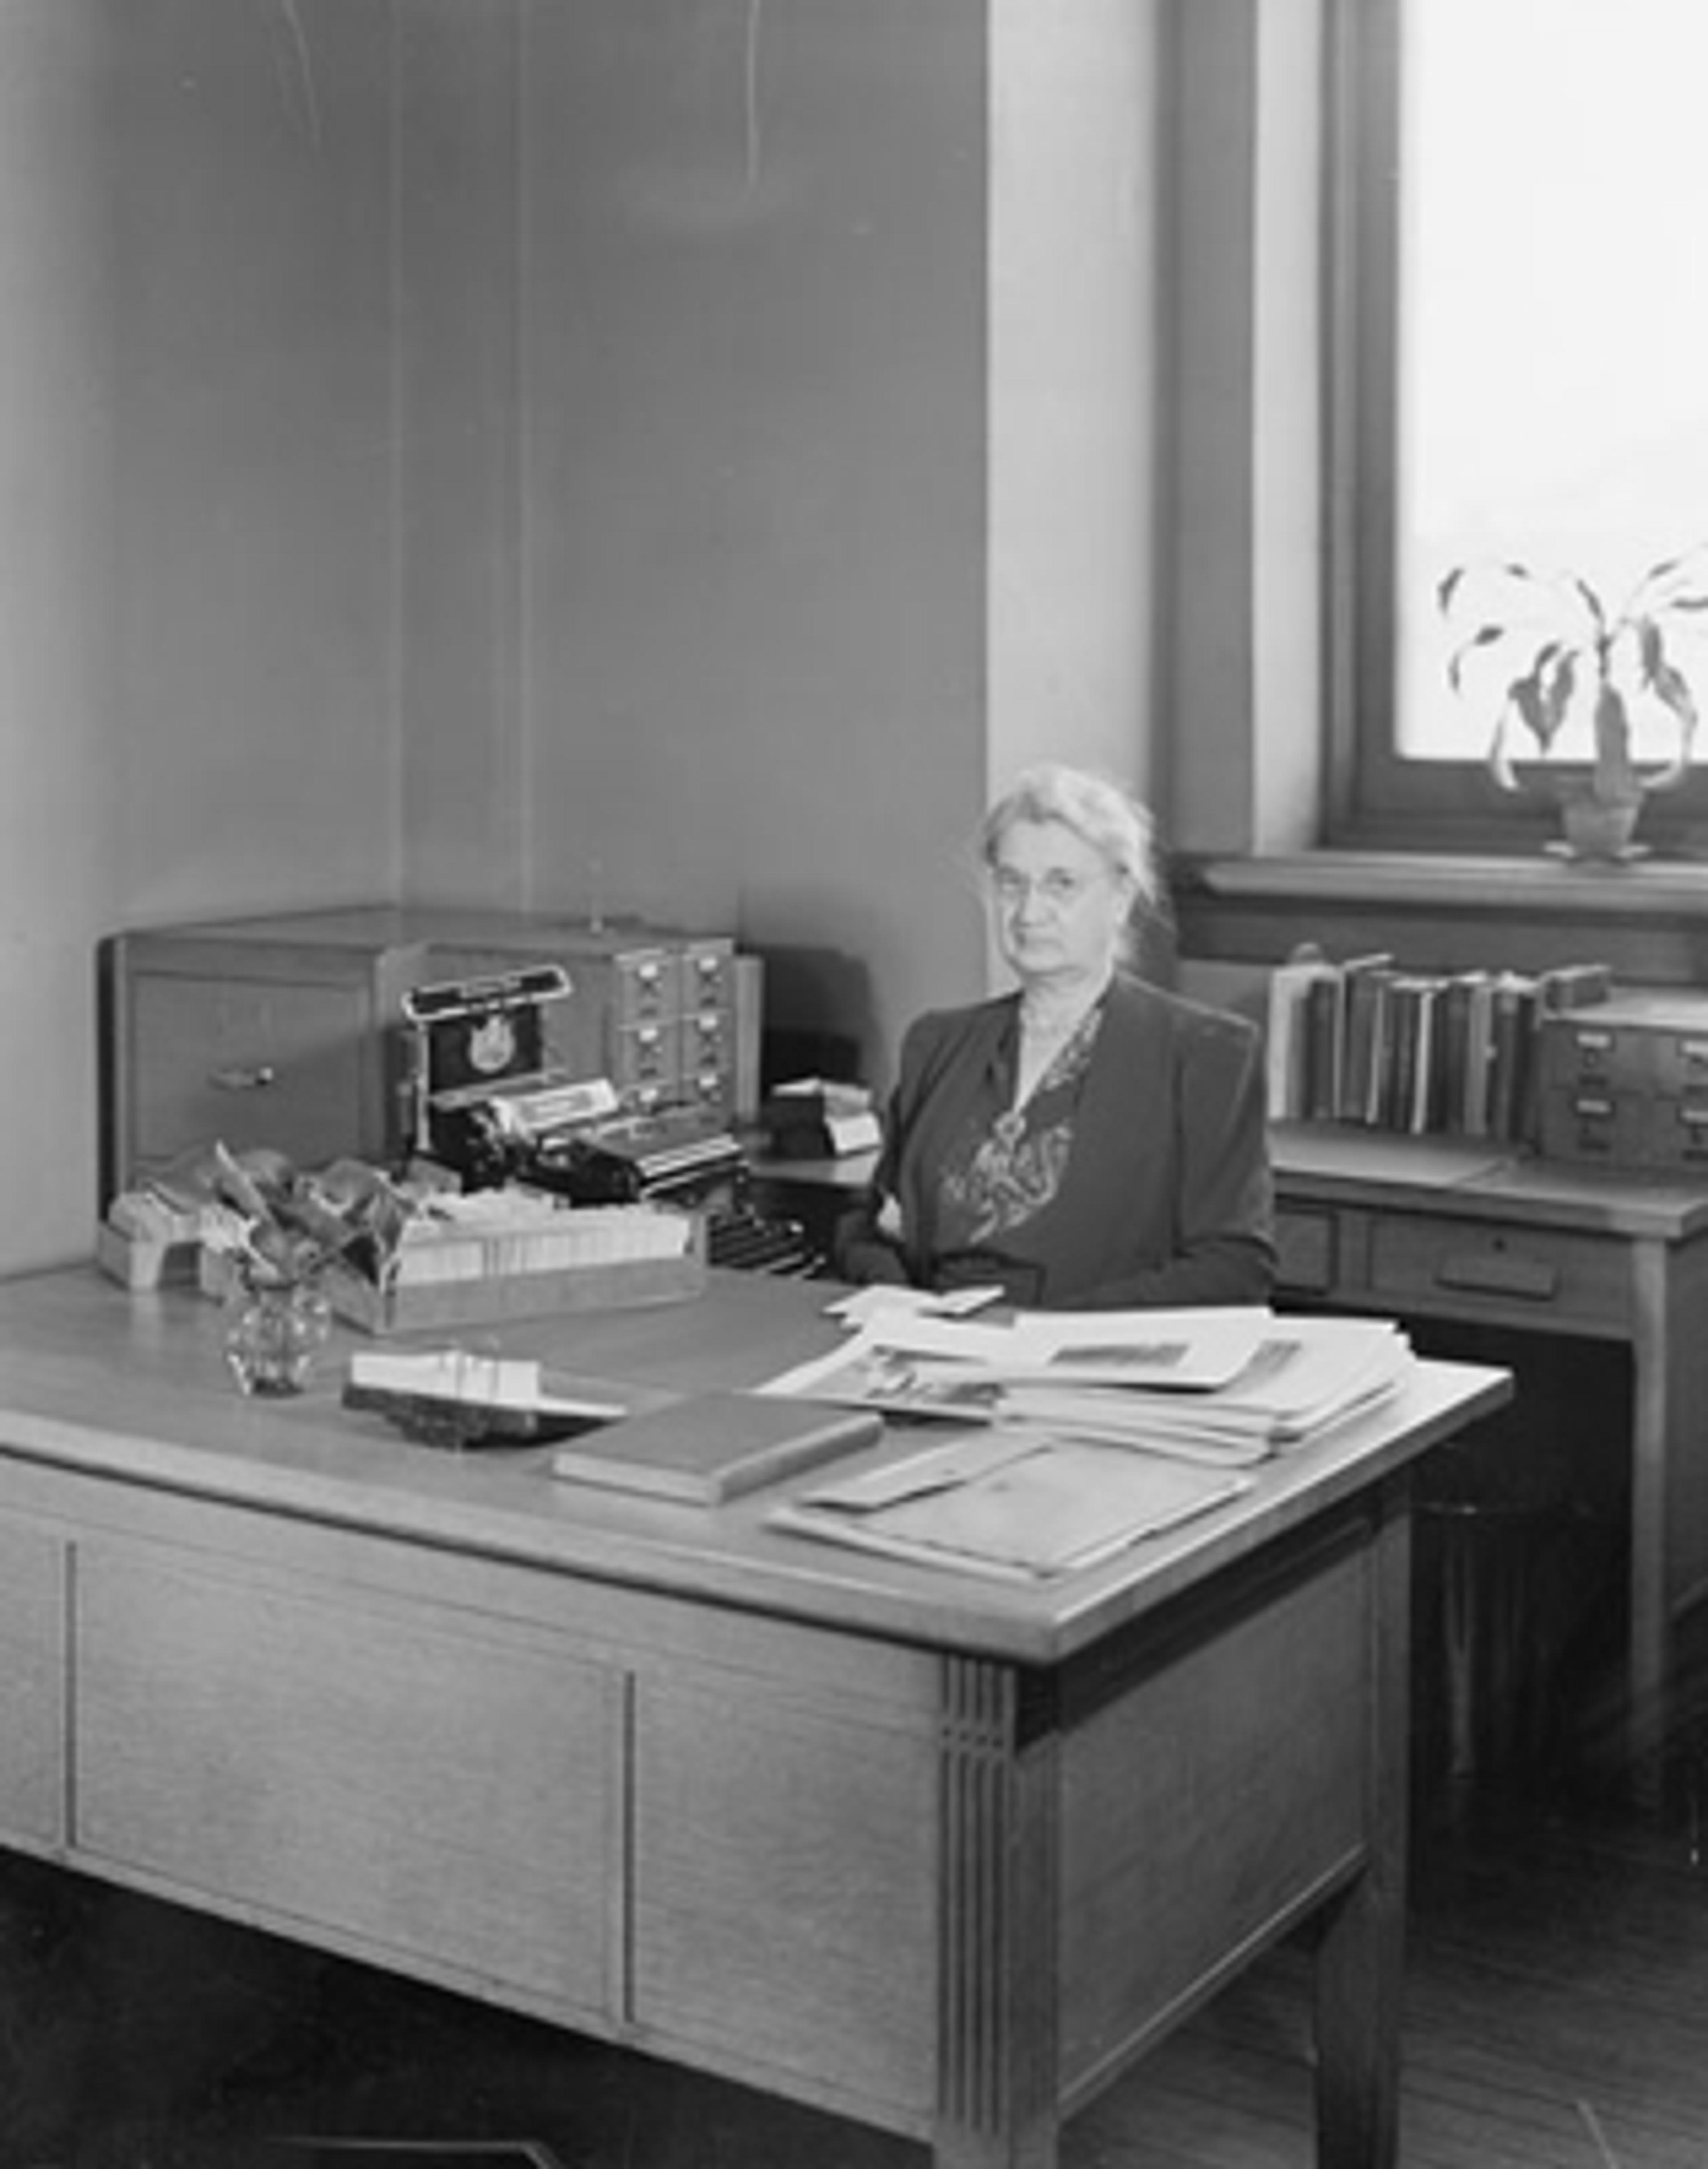 The Metropolitan Museum of Art, Catalogue Division; View of Margaret A. Gash, supervisor, seated at her desk. Photographed January 21, 1941